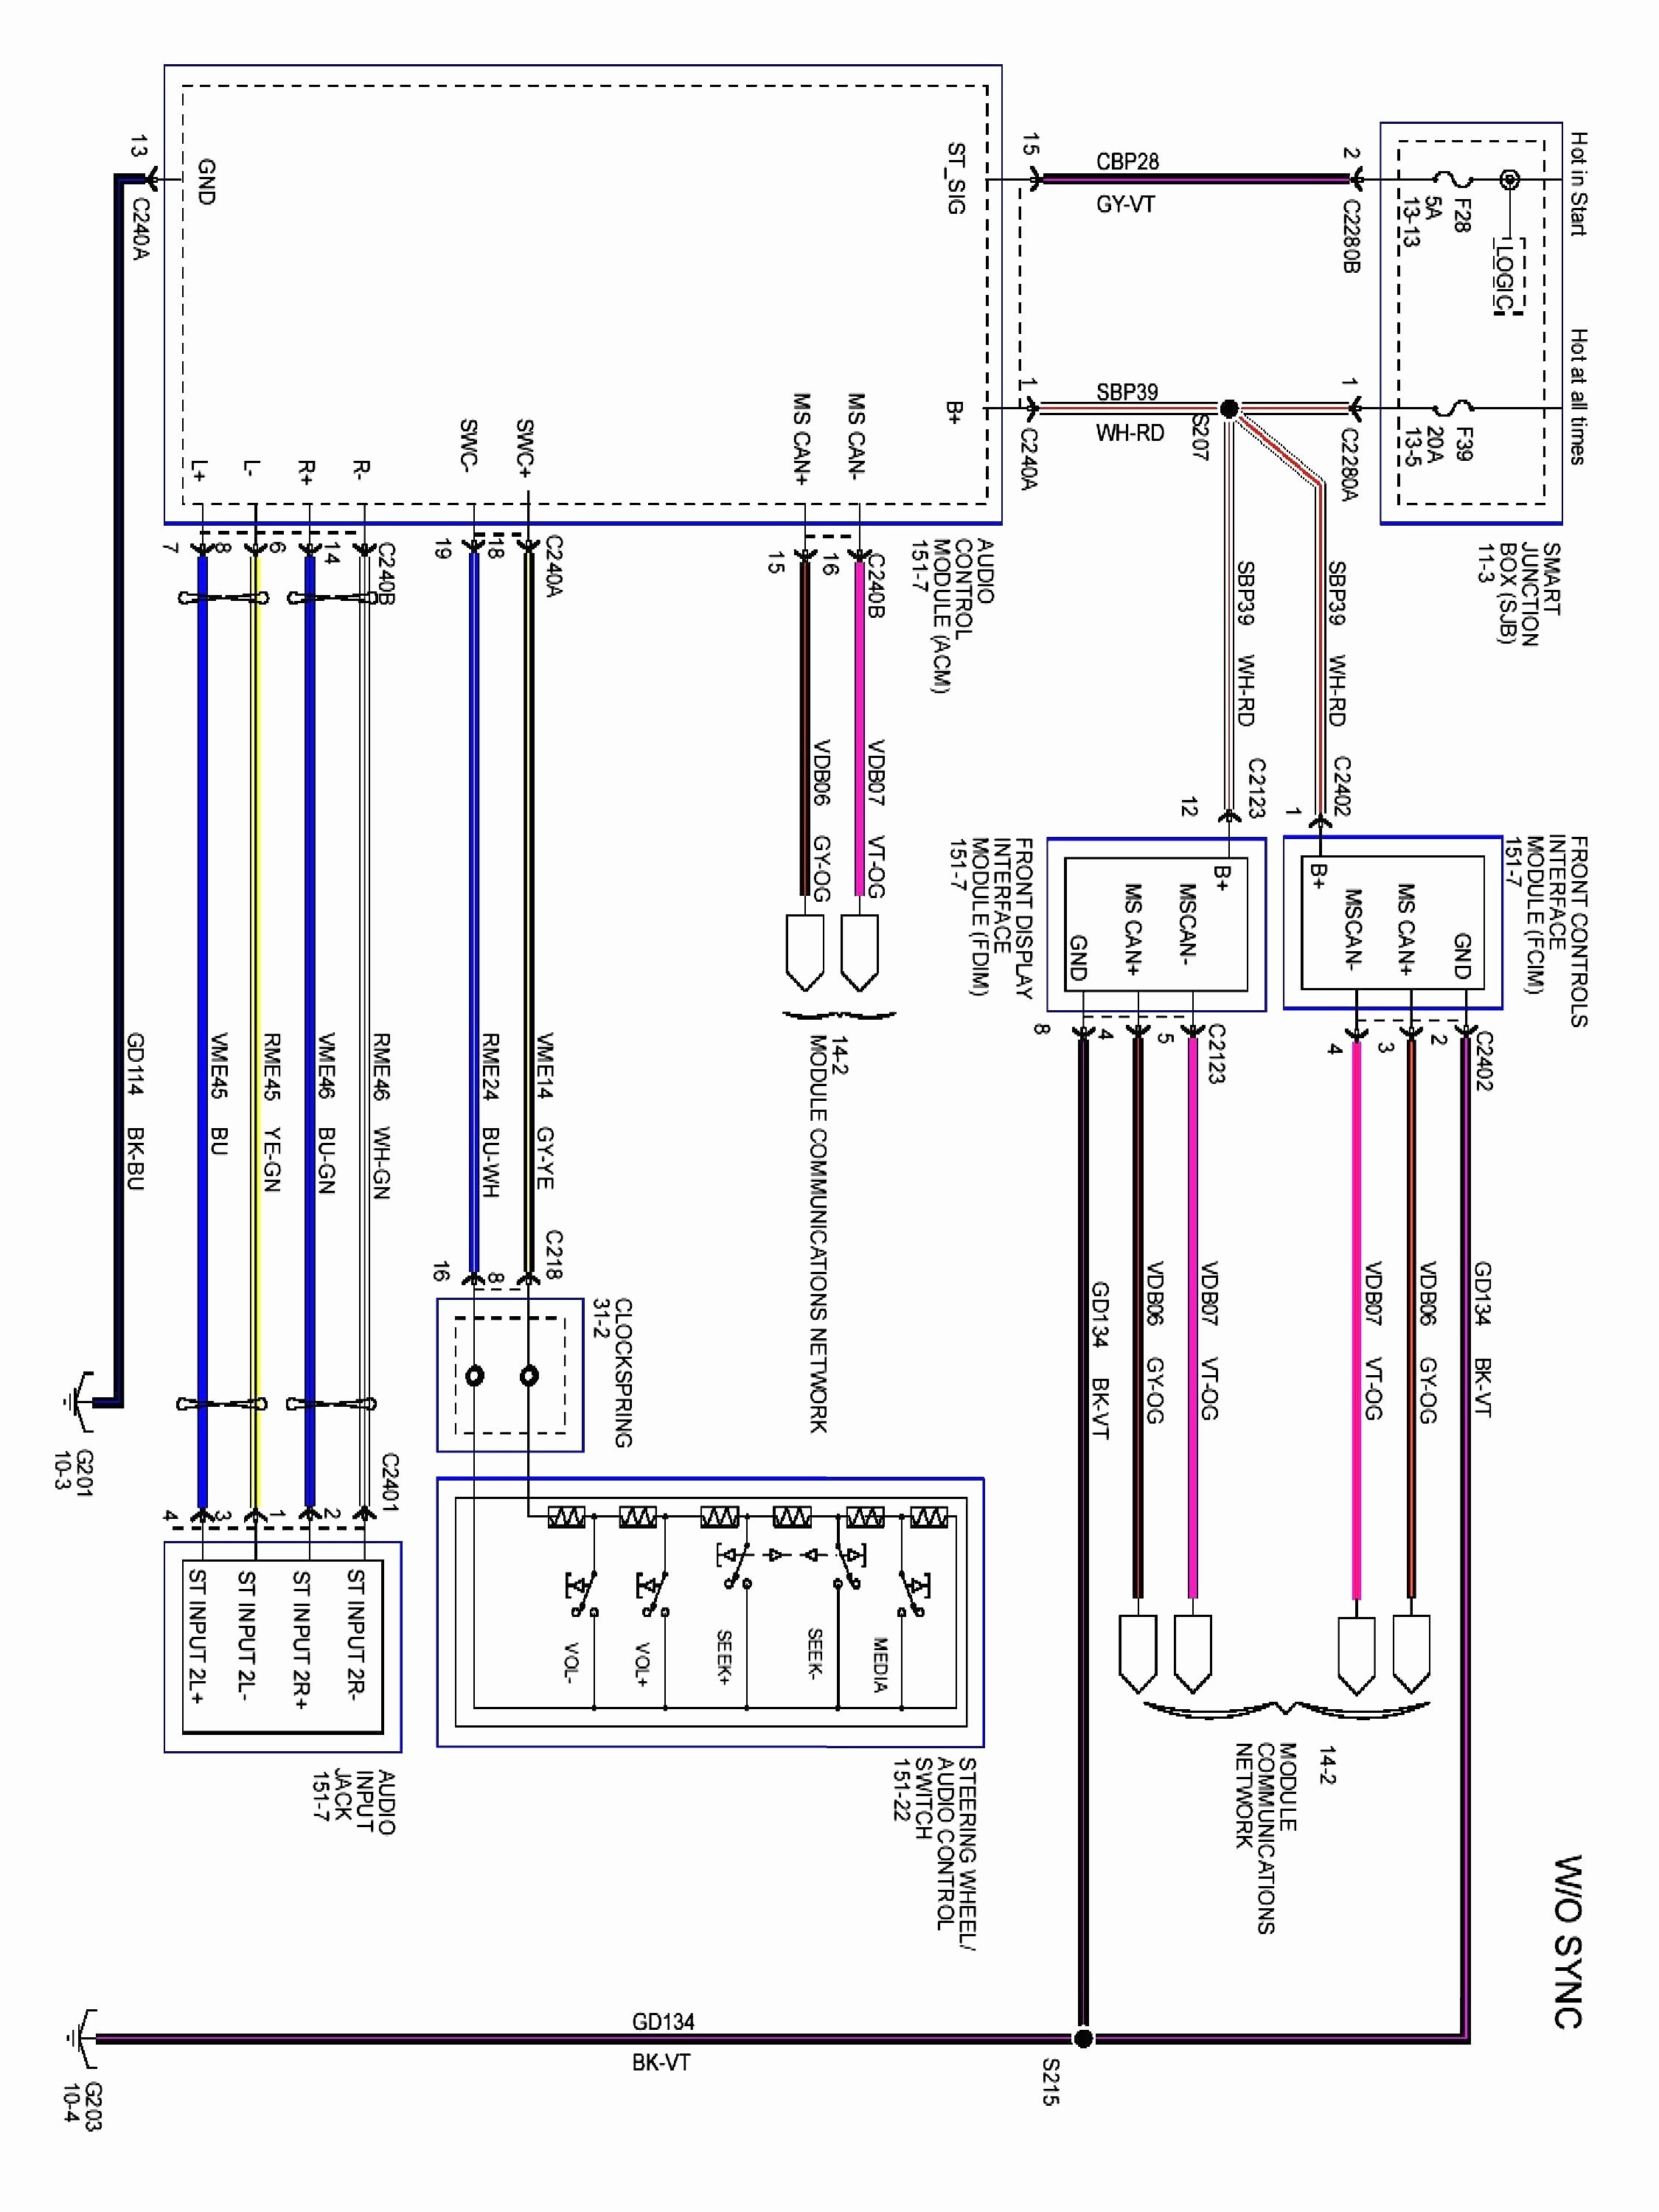 Wiring Diagram Vehicle Print Wiring Diagram for Amplifier Car Stereo Best Amplifier Wiring